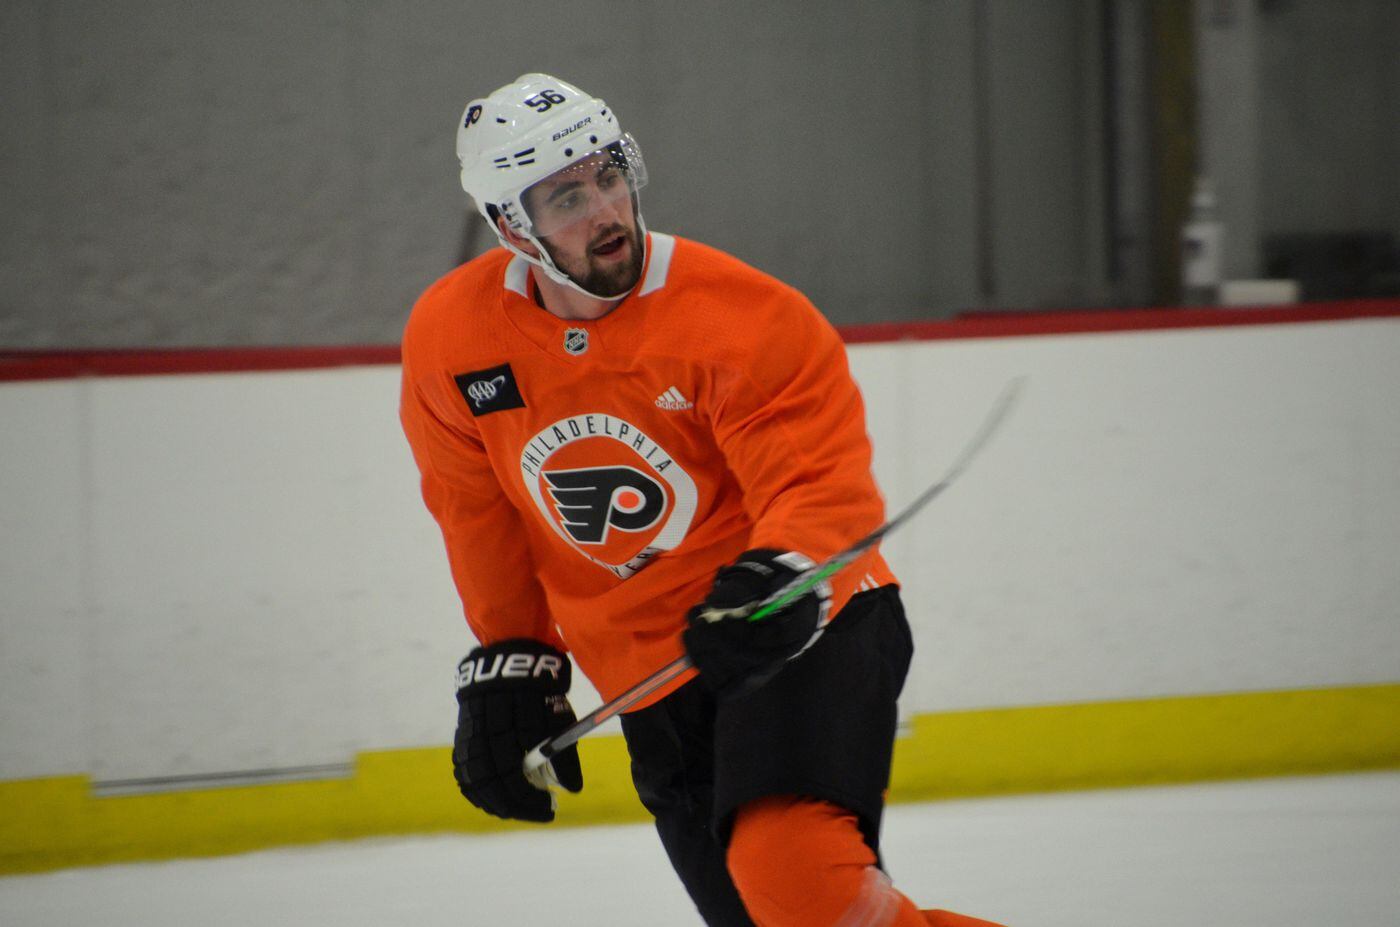 New Flyers defenseman Erik Gustafsson skating in Voorhees on Dec. 23. He might be on one of the team's power-play units.